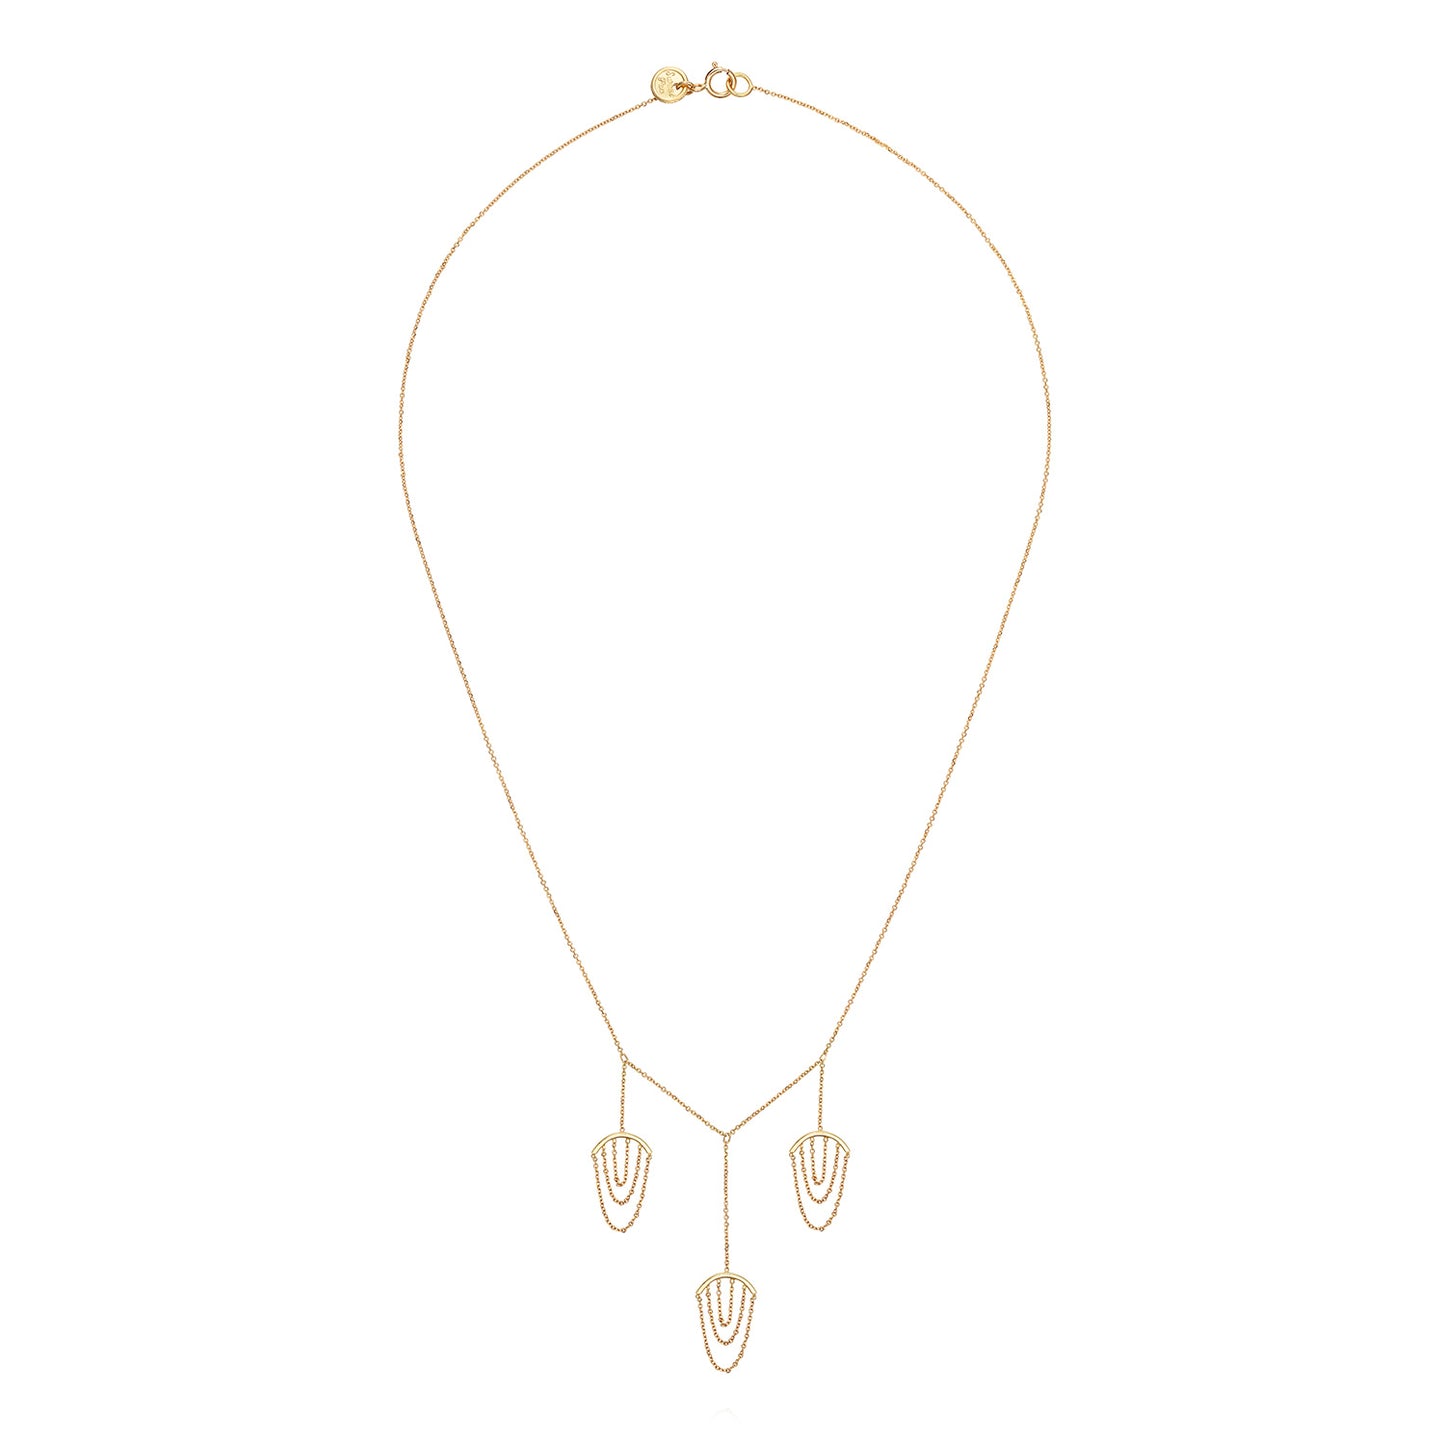 Sweet Pea 18ct yellow gold Nouveau Now triple drop necklace with looped chains. 